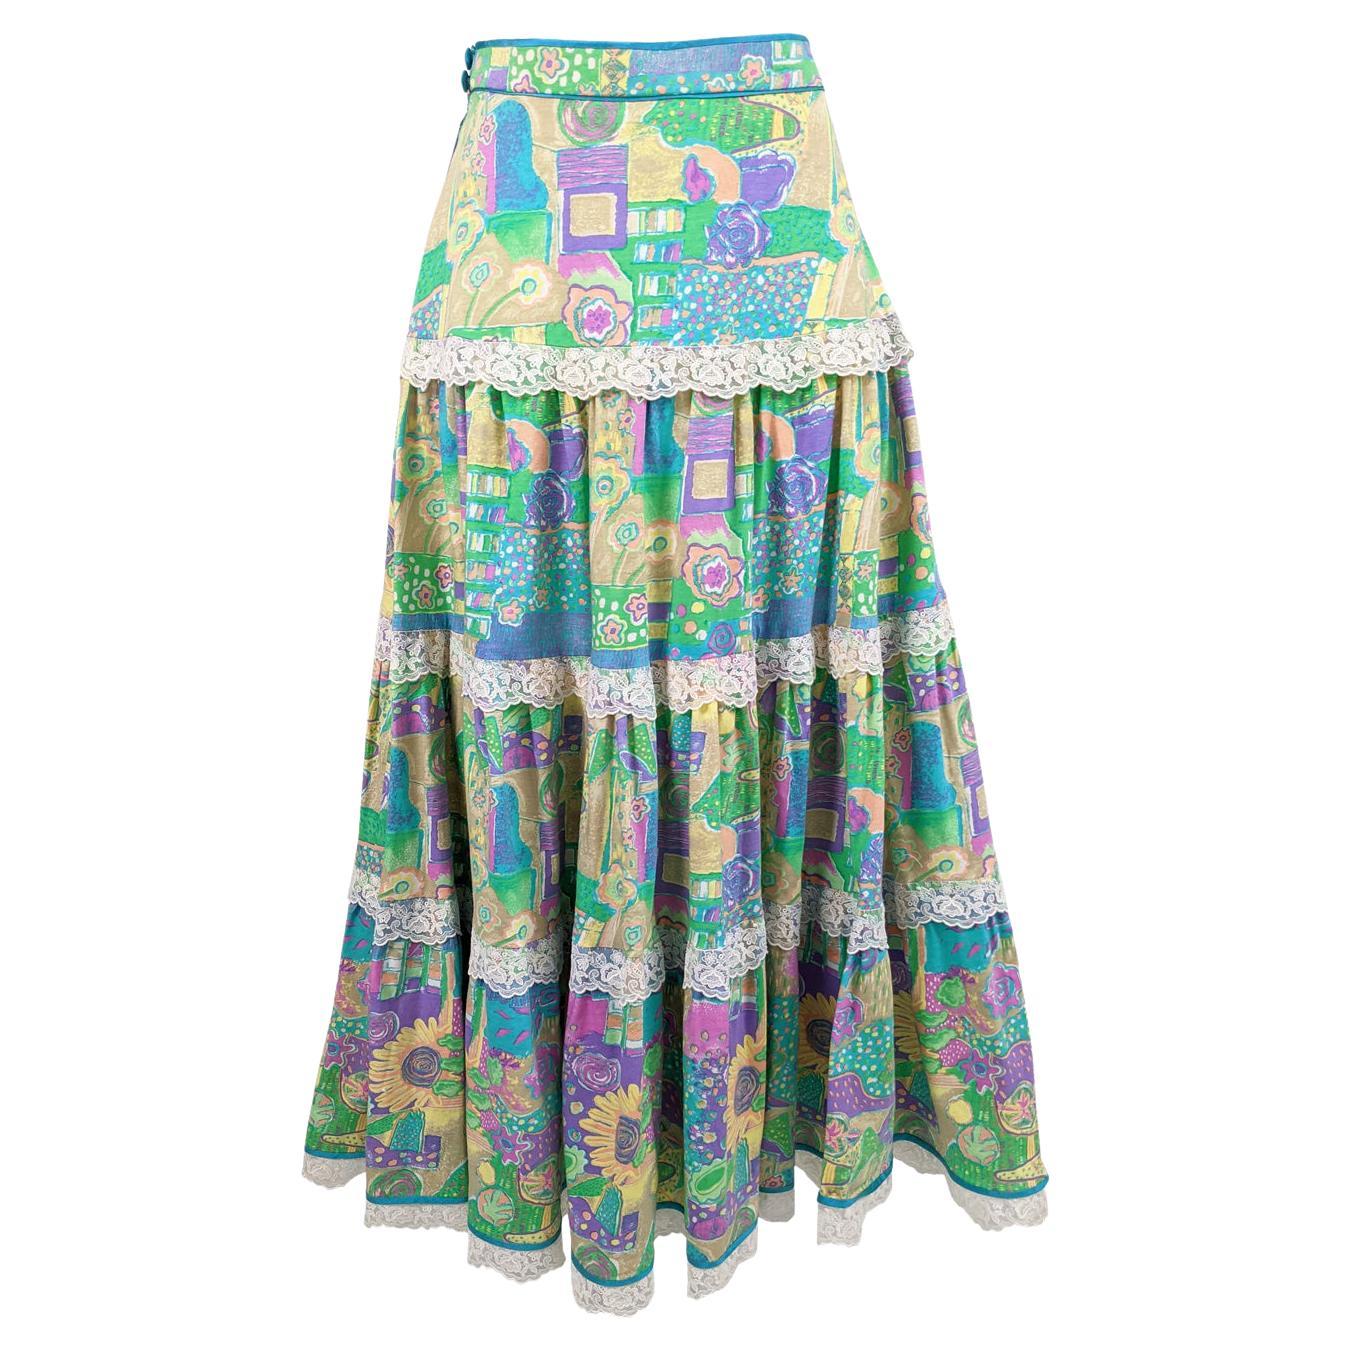 Annabelinda Vintage Tiered Expressionist Print Boho Peasant Maxi Skirt, 1970s For Sale